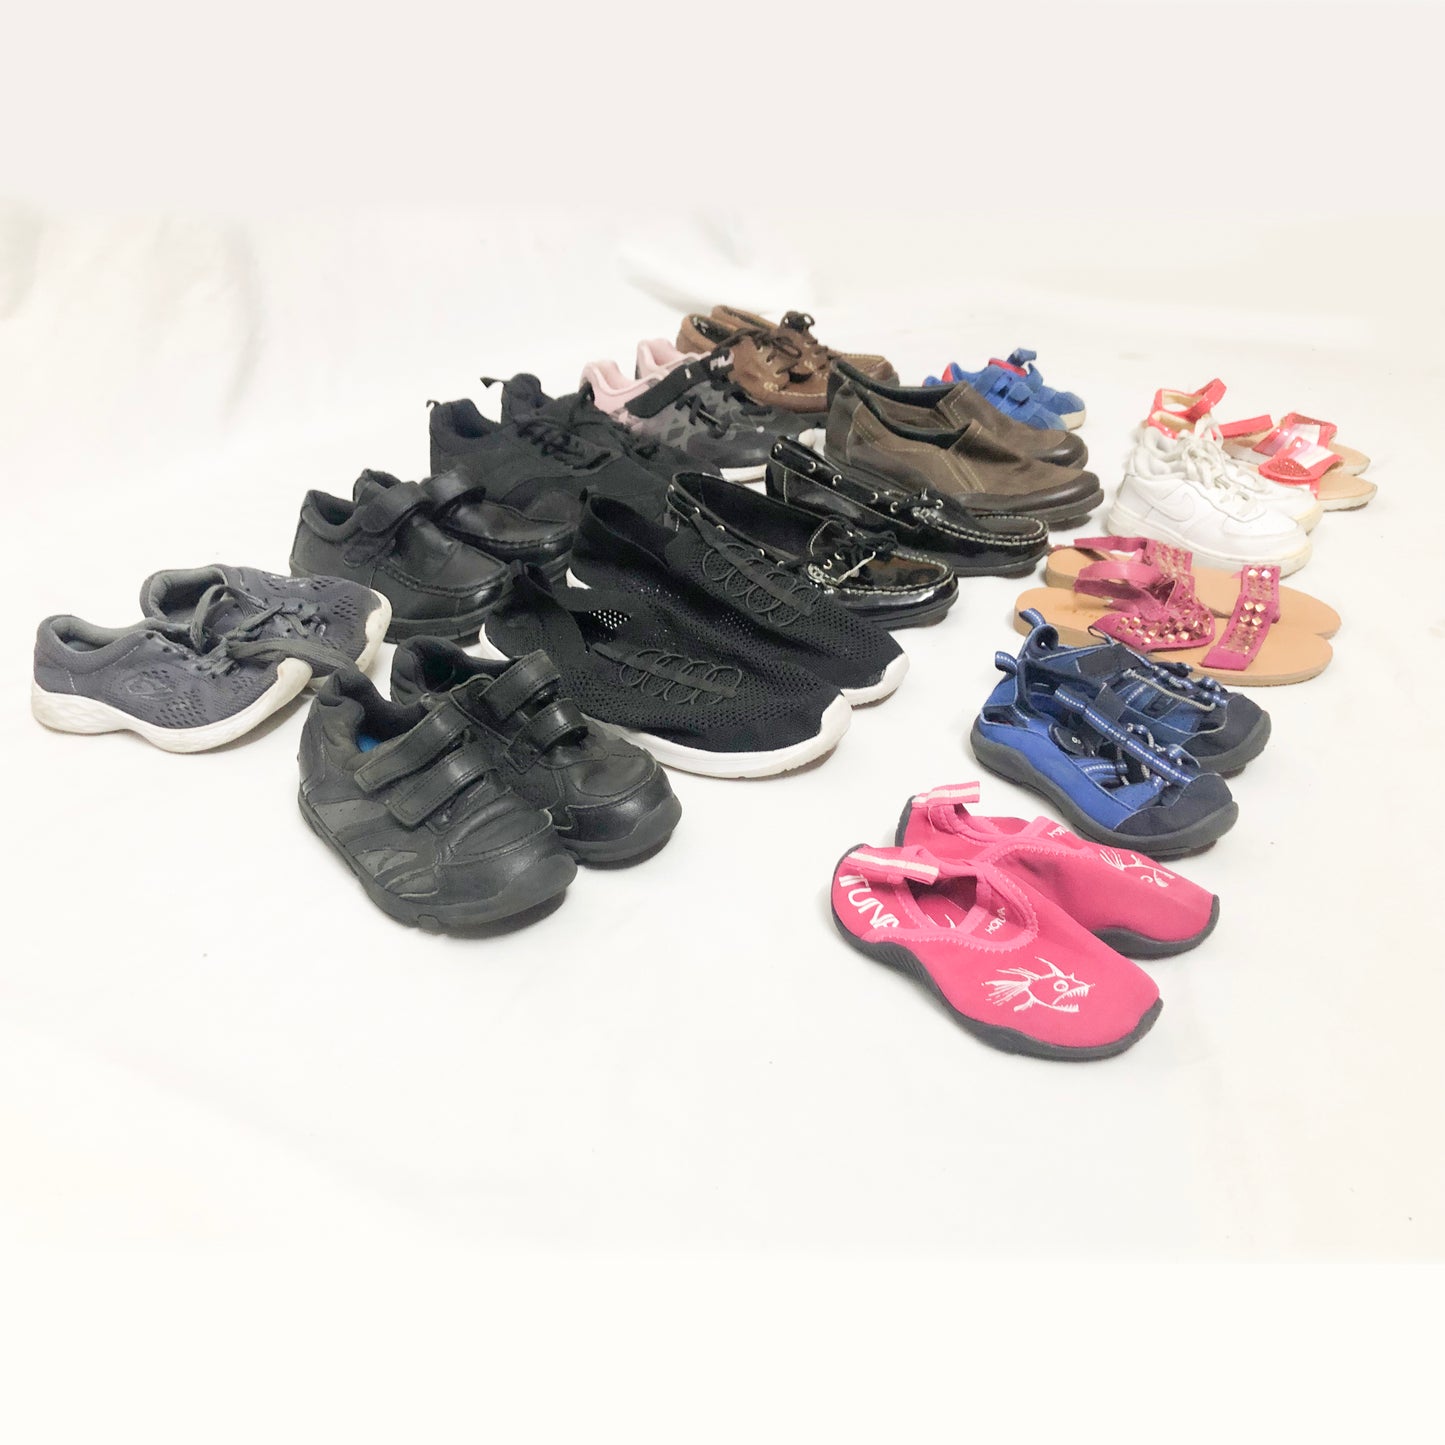 Grade 1 and 2 Kids Shoes Bundle of 50 Pairs